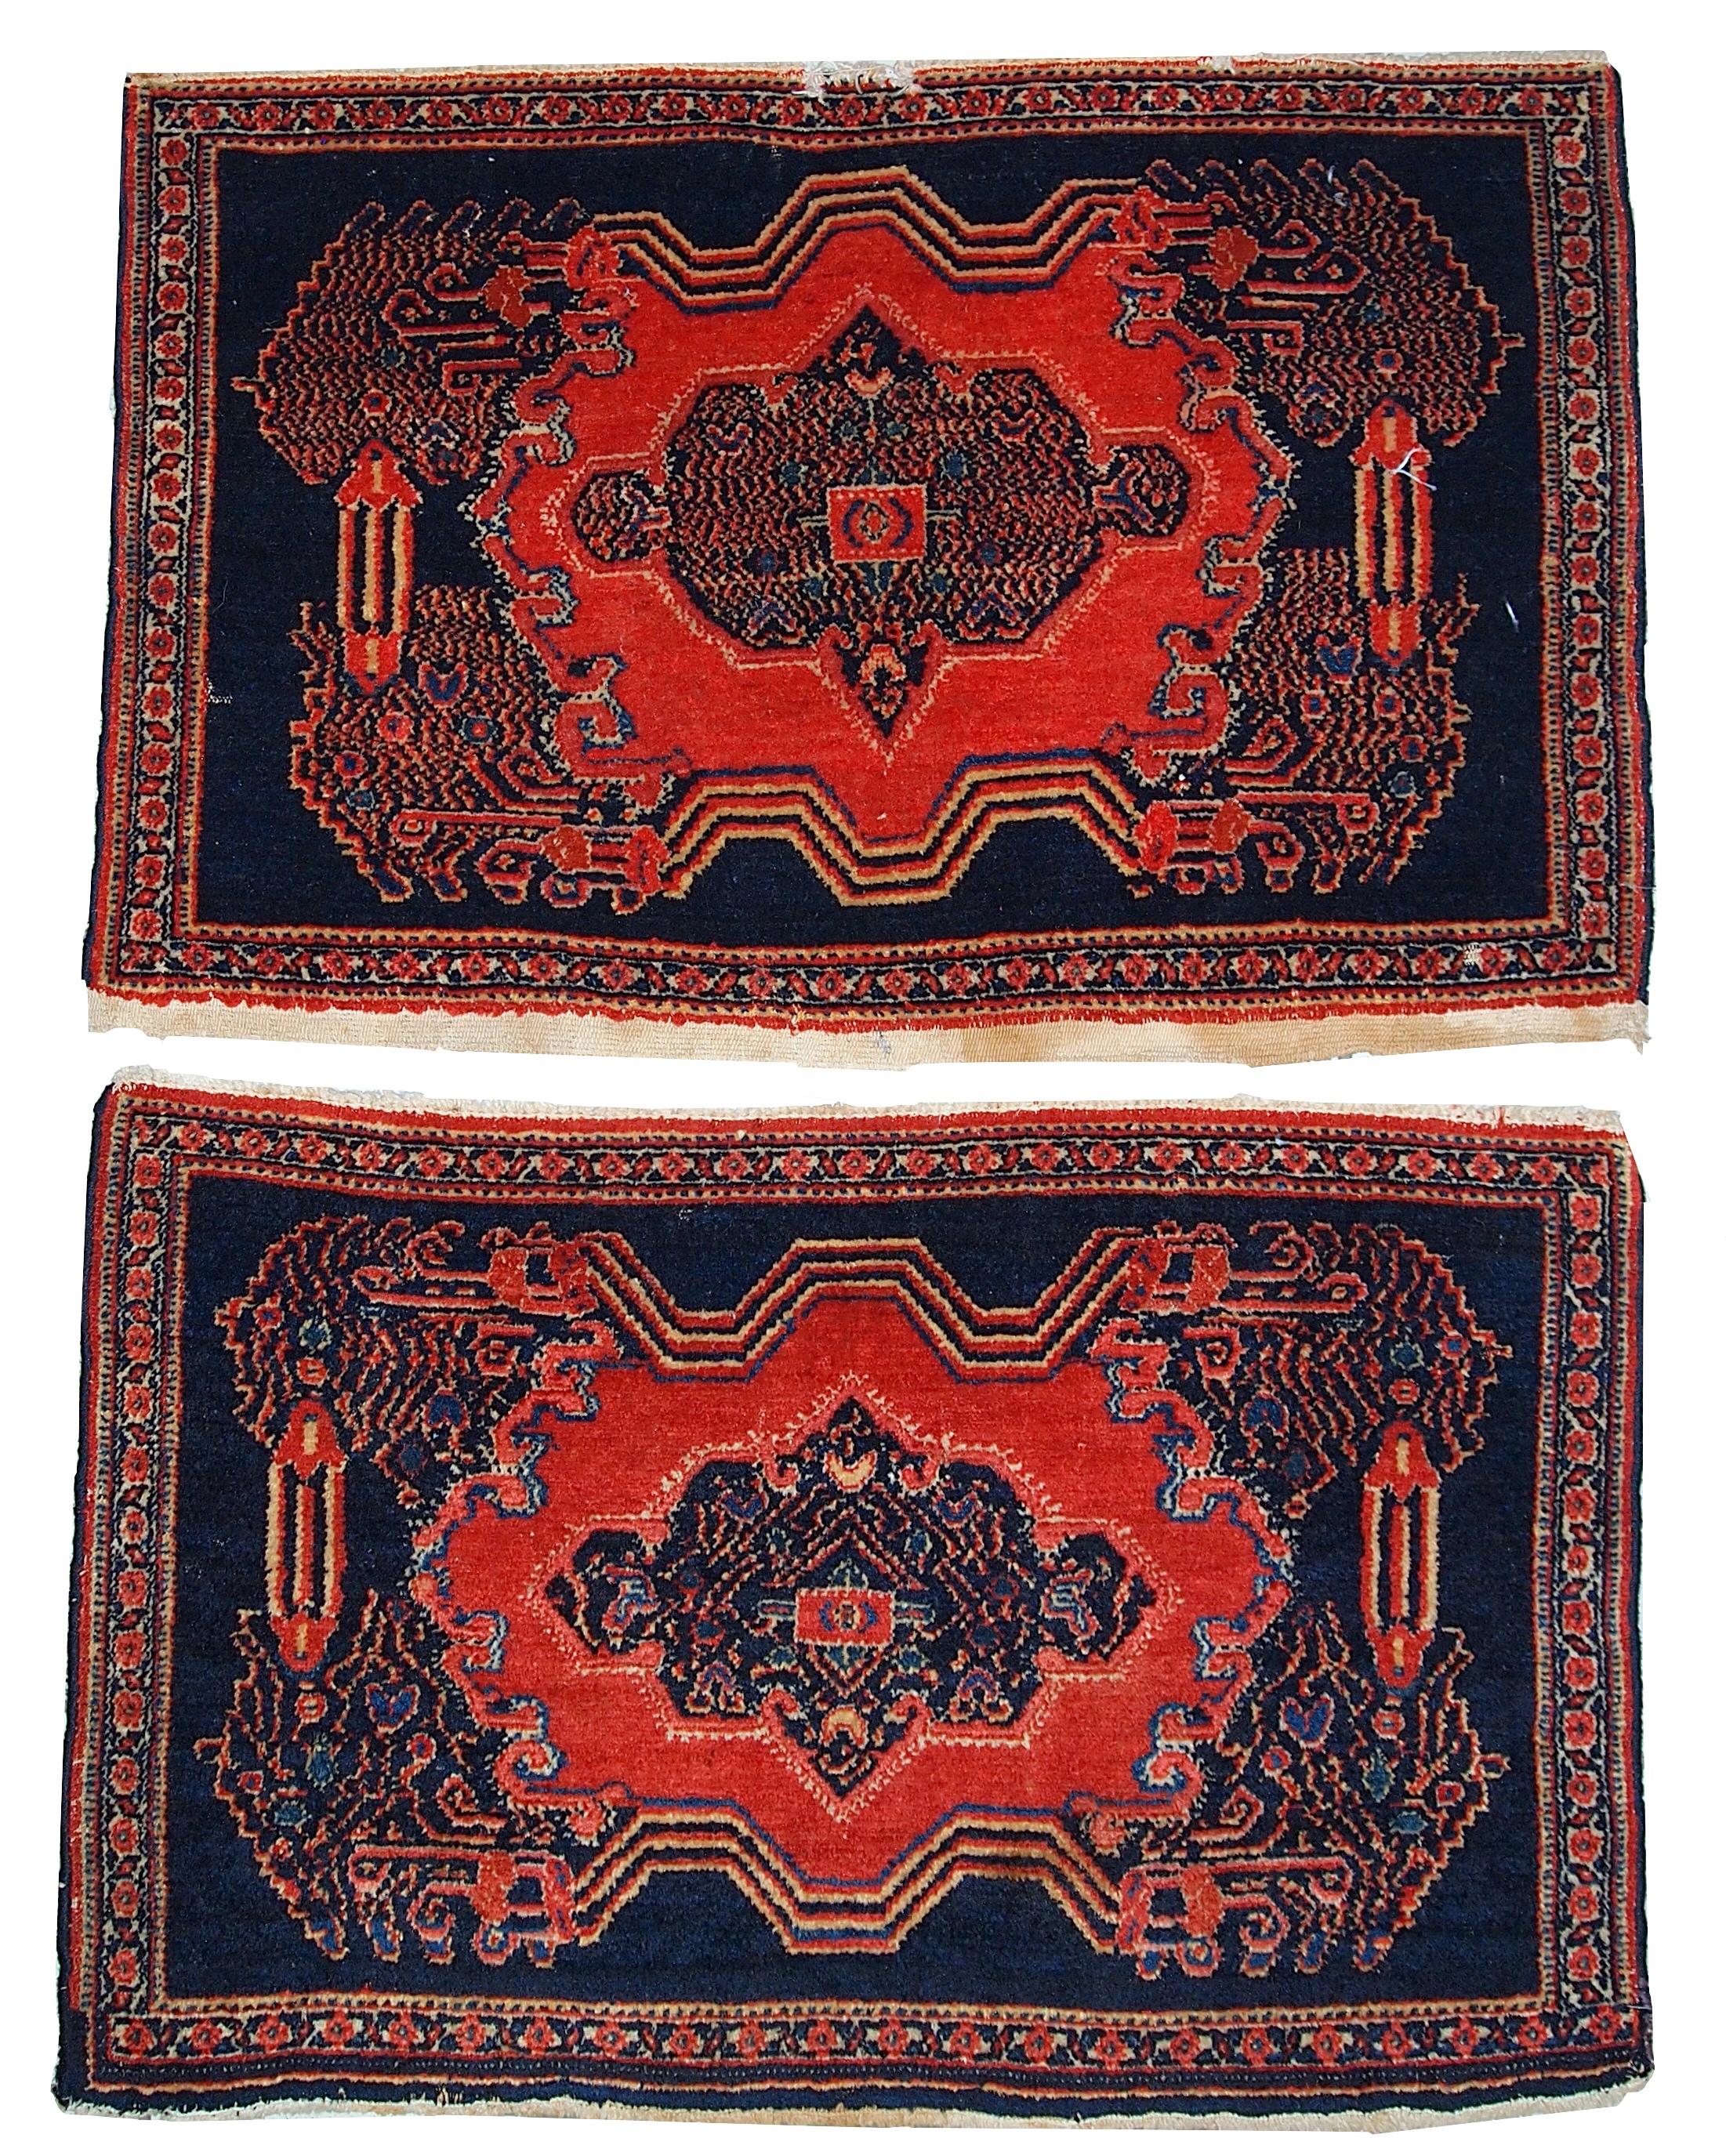 Antique Senneh rugs in original good condition. Very fine rugs with detailed design. Measures: 1.7' x 2.6' (52cm x 80cm).